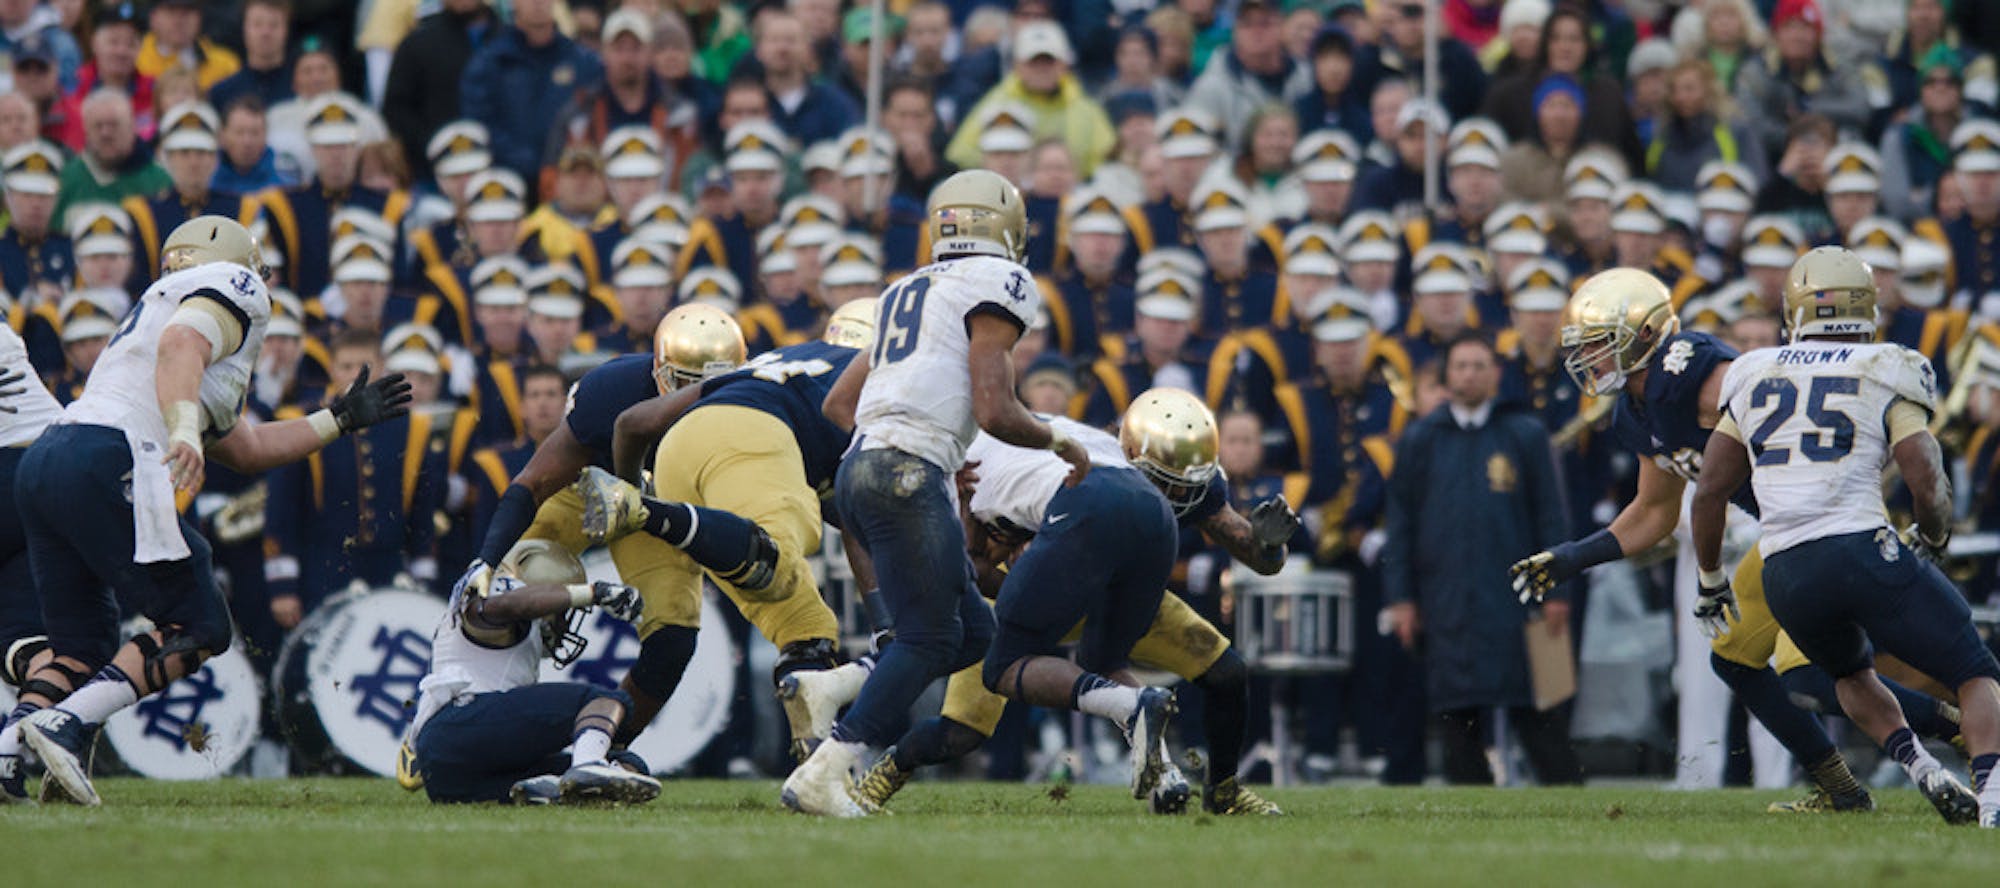 Navy junior quarterback Keenan Reynolds (19) directs the prolific Midshipmen triple option rushing attack against the Irish in Notre Dame’s 38-34 win over the Midshipmen in 2013 at Notre Dame Stadium. Reynolds has rushed for 639 yards and 11 touchdowns in six games this season.